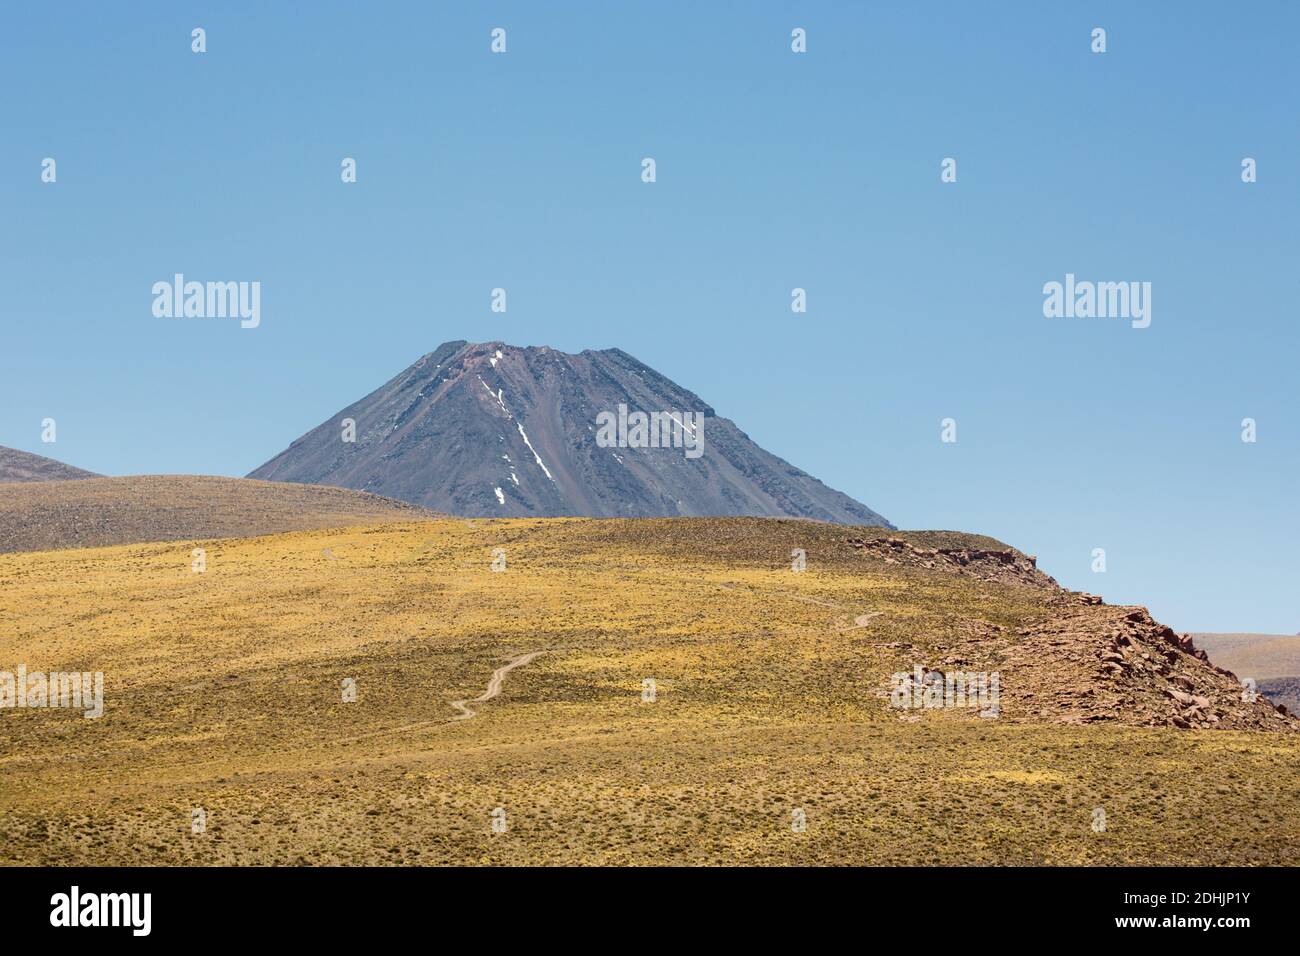 Volcano Chiliques rises above the high altitude grasslands of the Andes altiplano, Chile Stock Photo